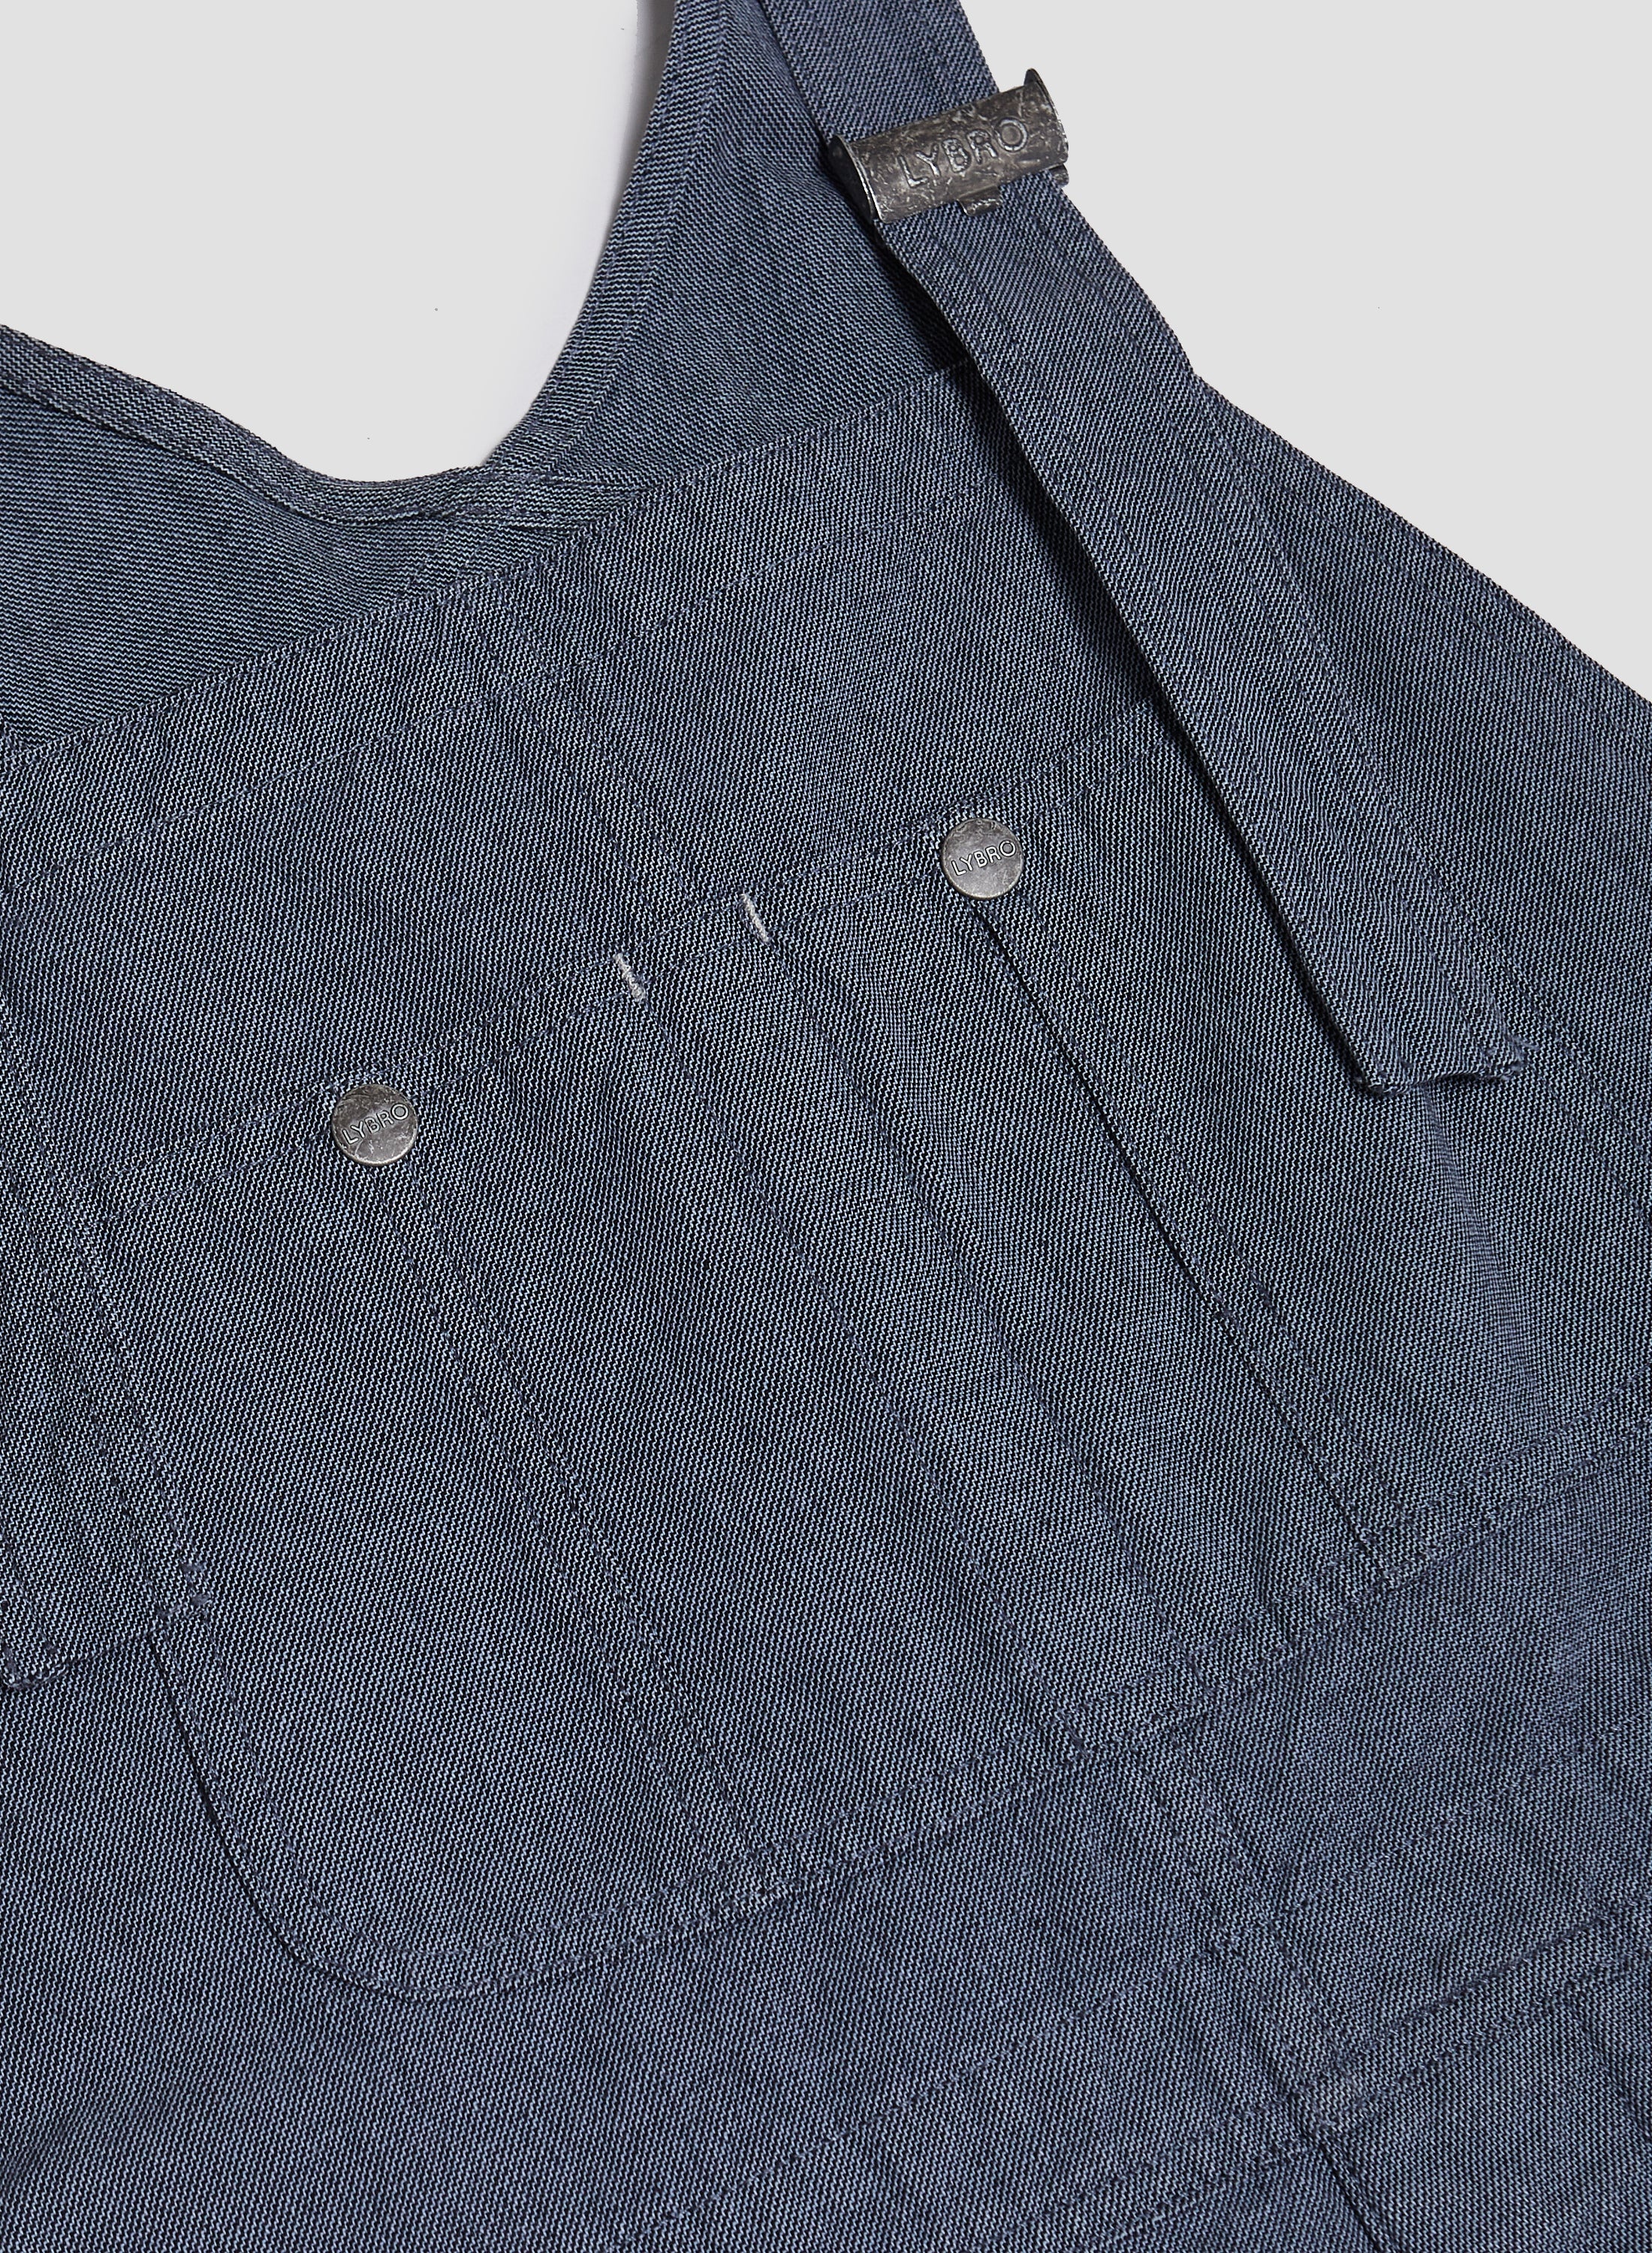 New Dungaree Broken Twill in Washed Blue - 6